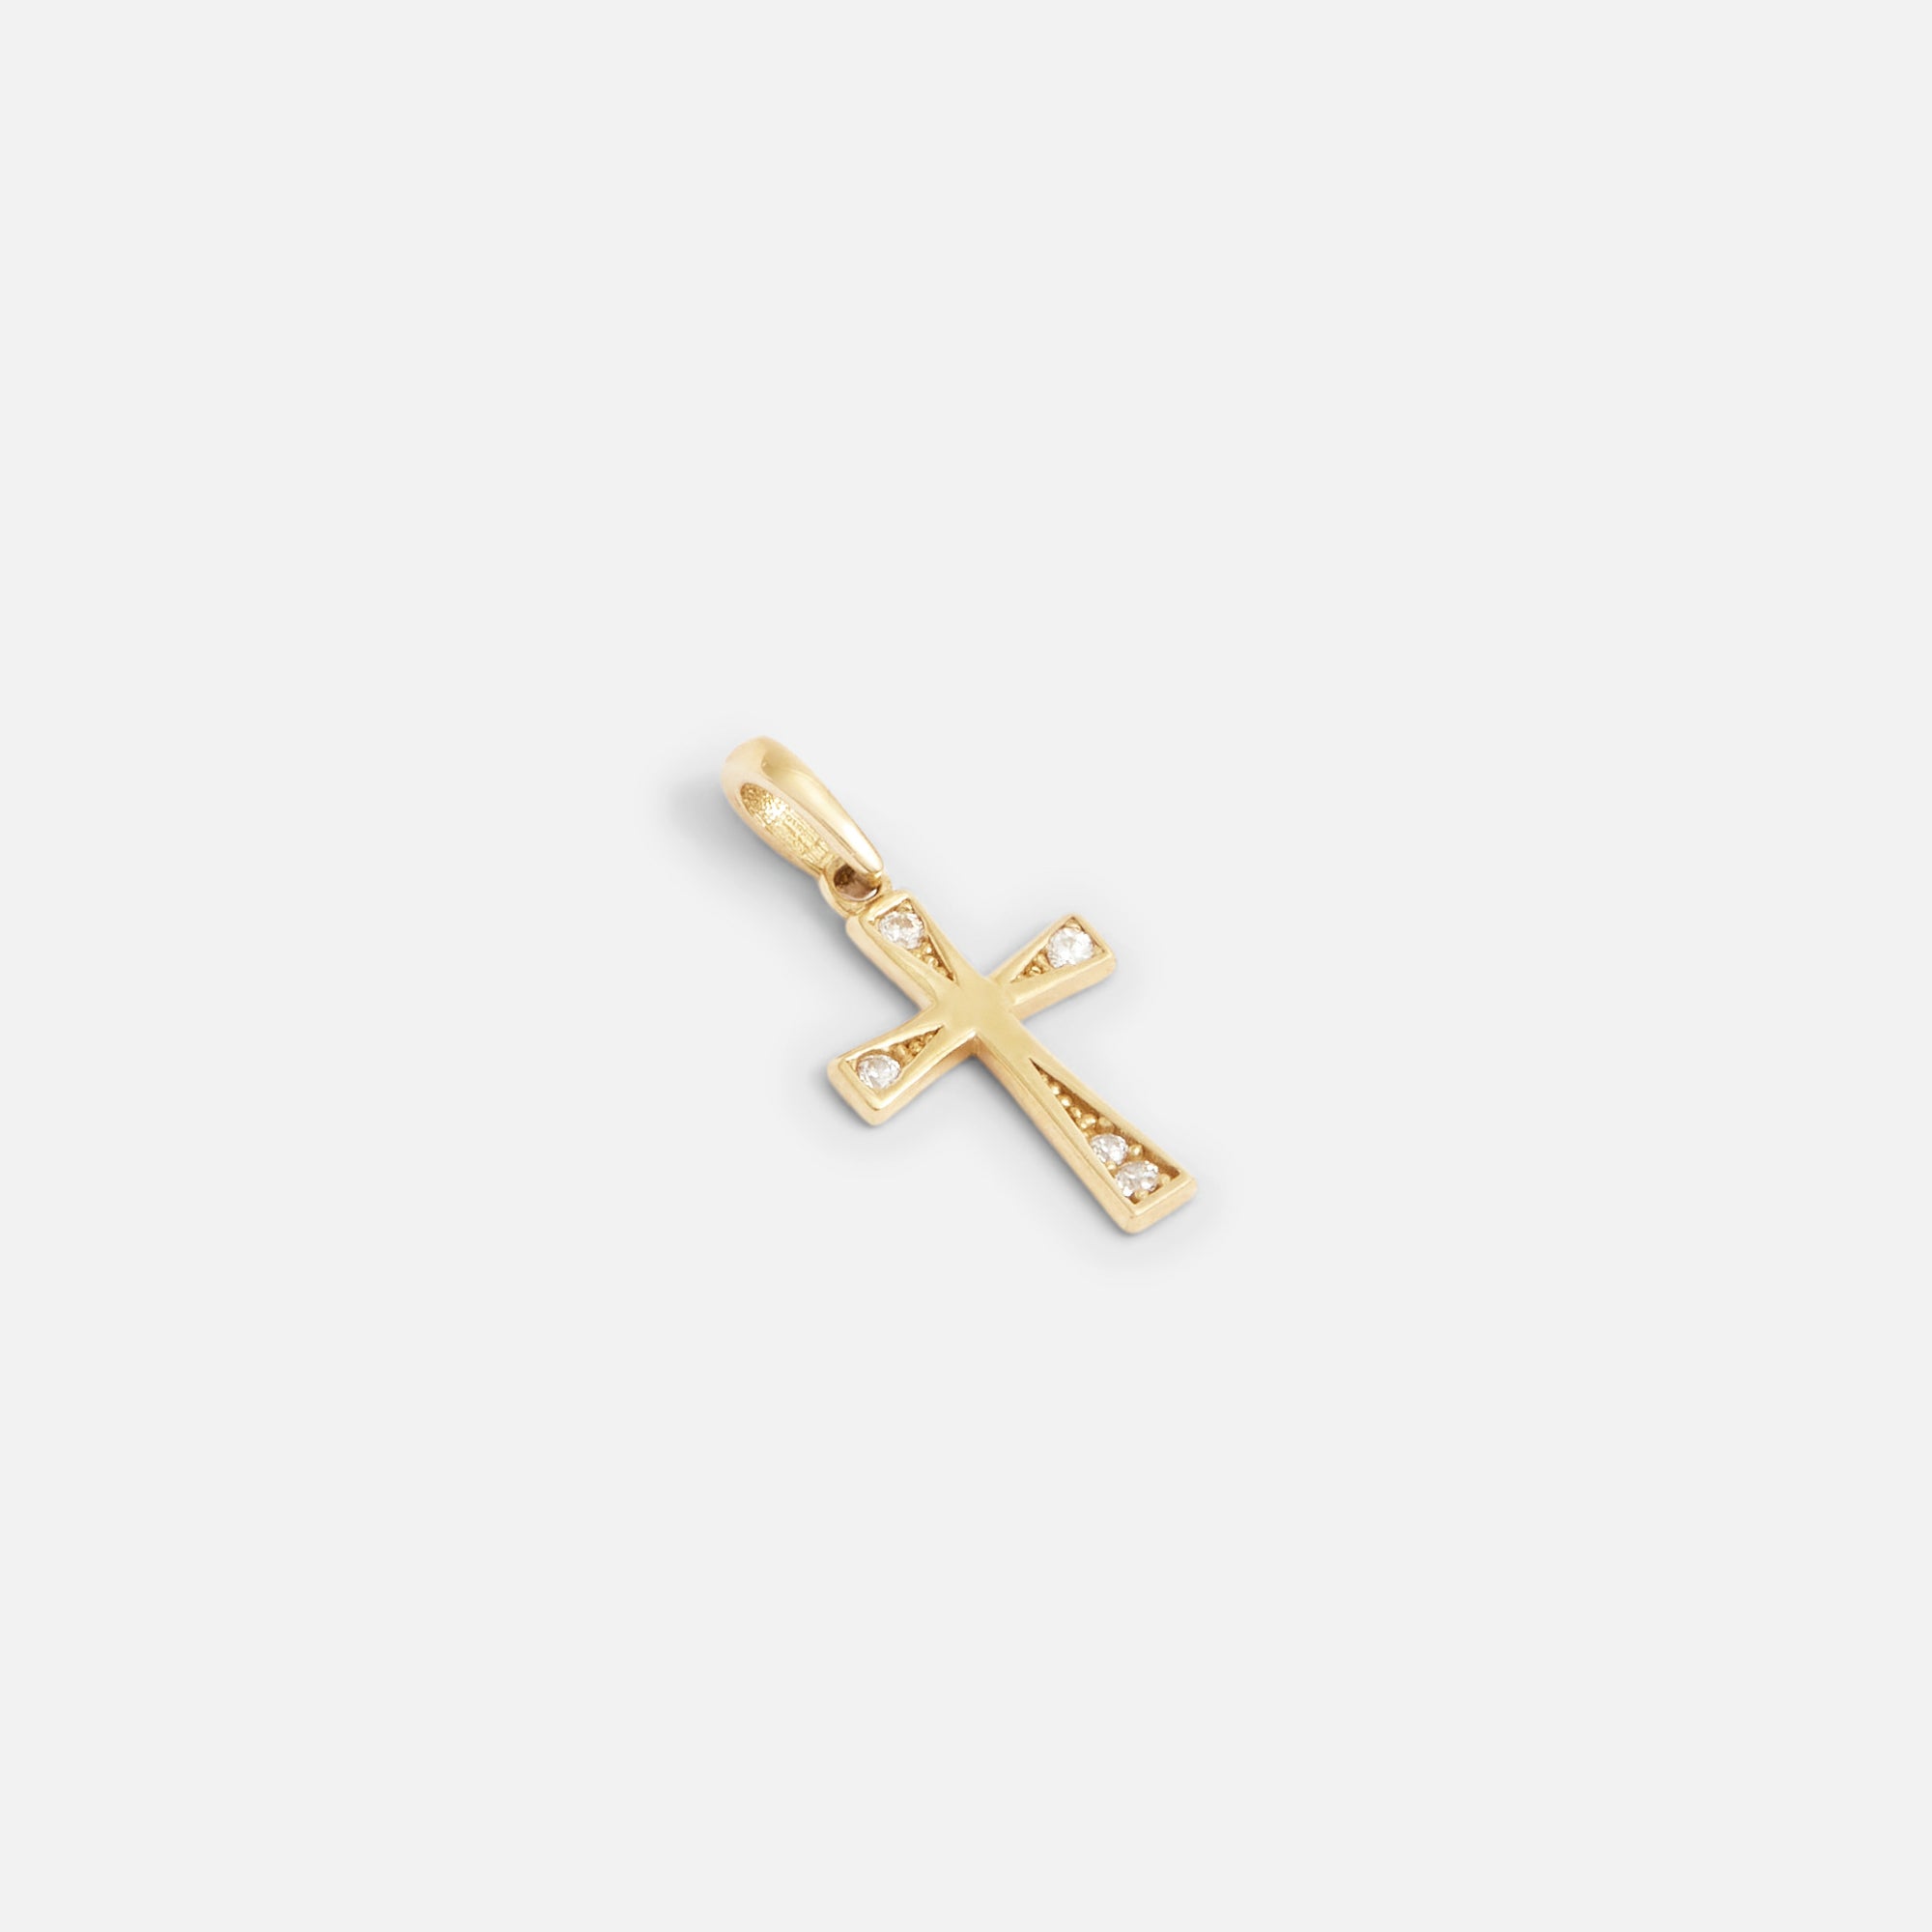 10k yellow gold cross charm with stones at the ends 